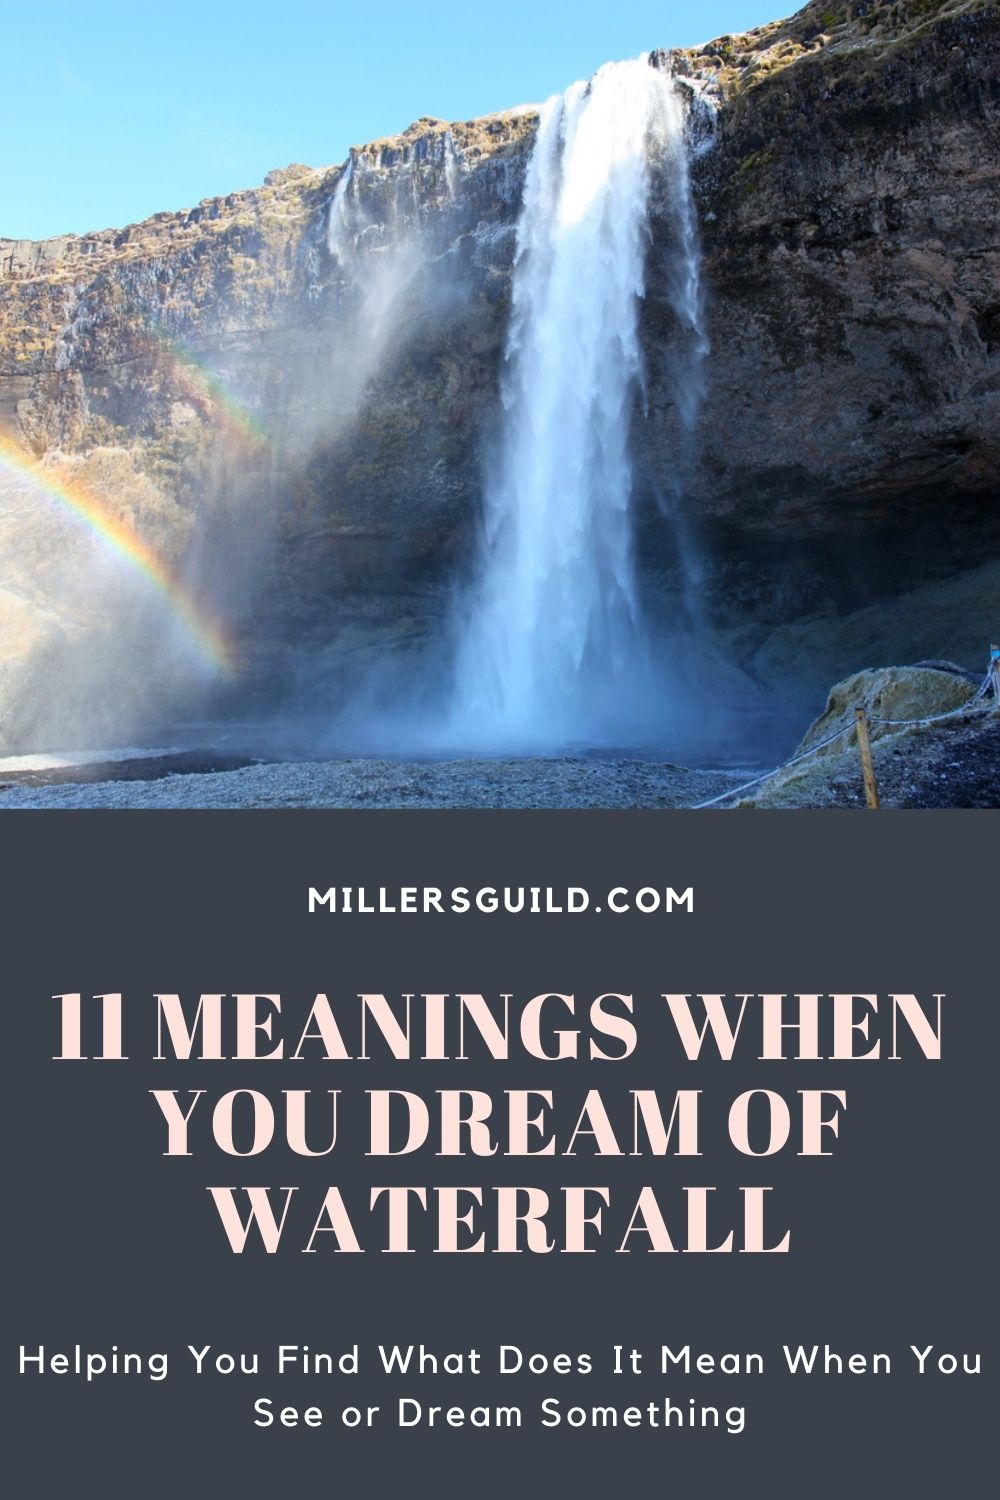 11 Meanings When You Dream of Waterfall 1